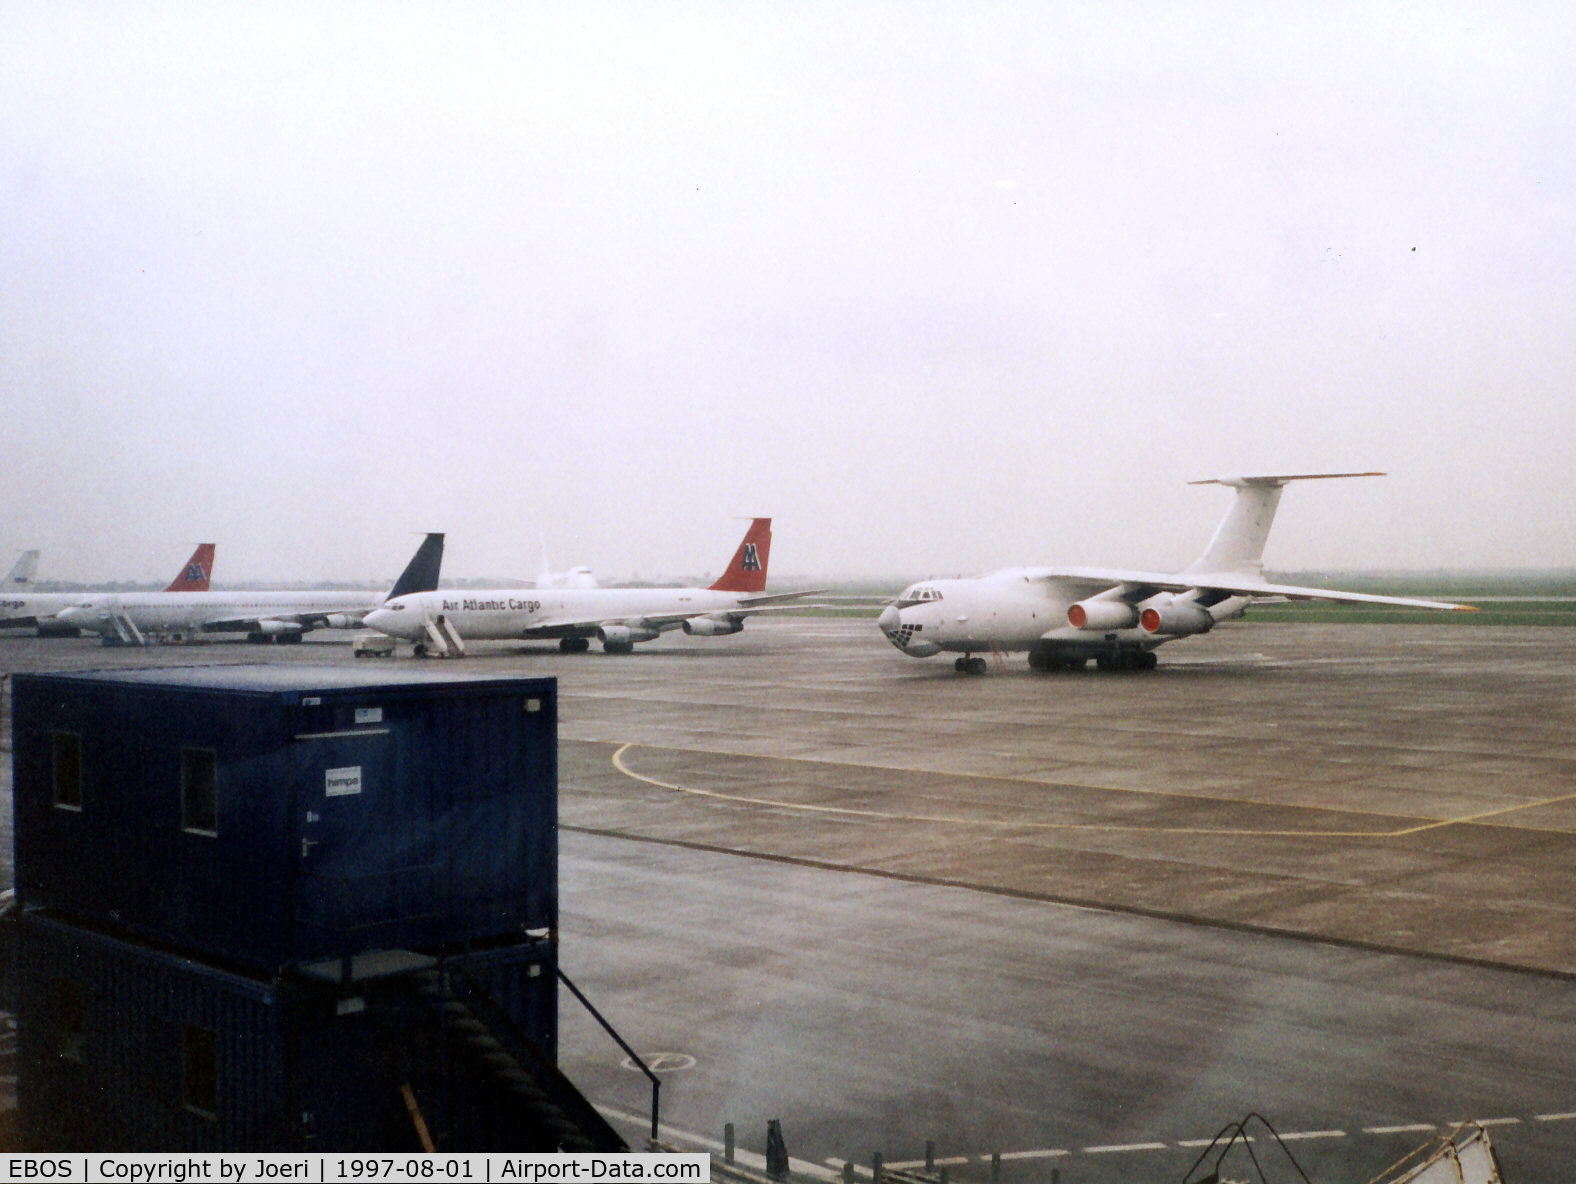 Ostend-Bruges International Airport, Ostend Belgium (EBOS) - General view on airplane parking area 1997